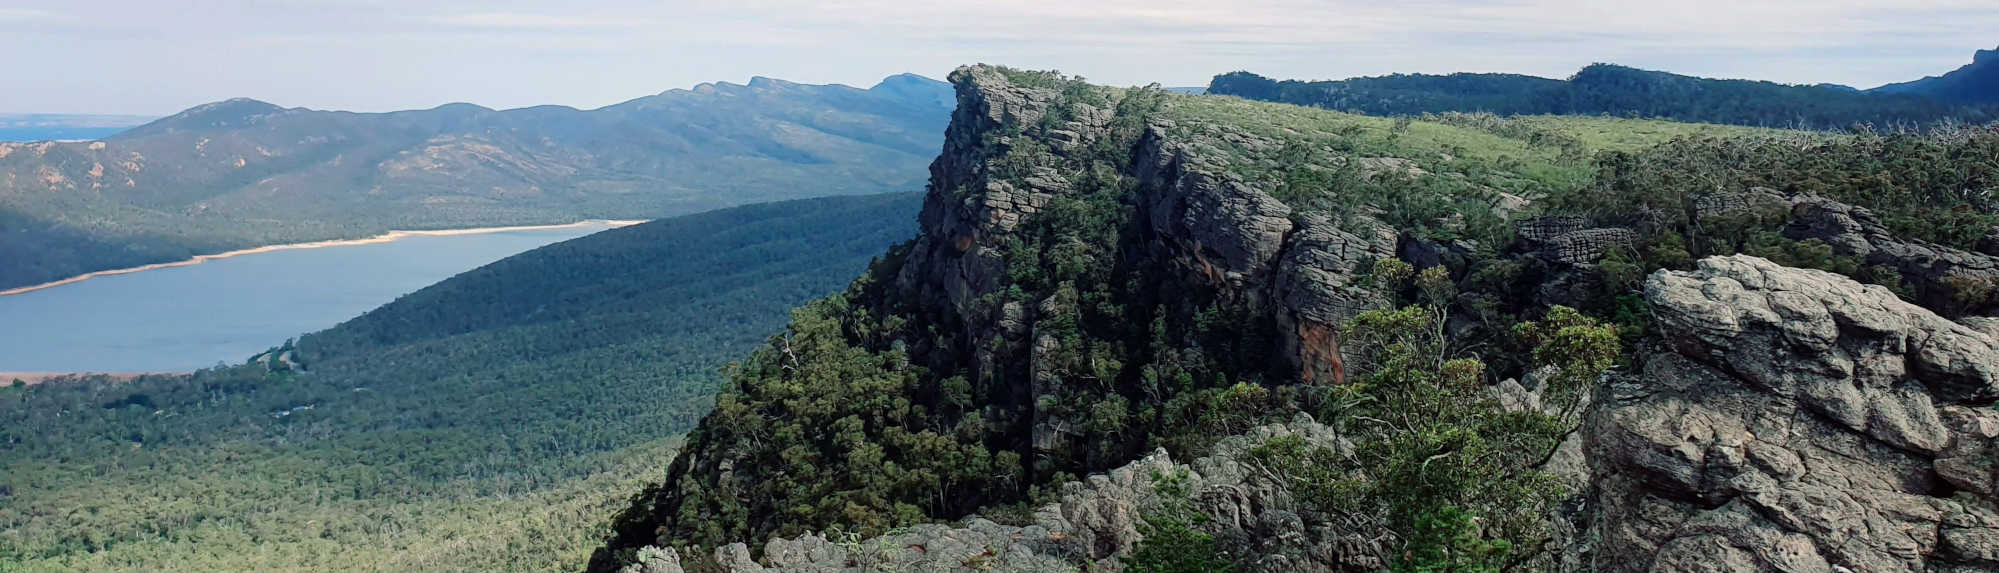 Best Things to see in the Grampians